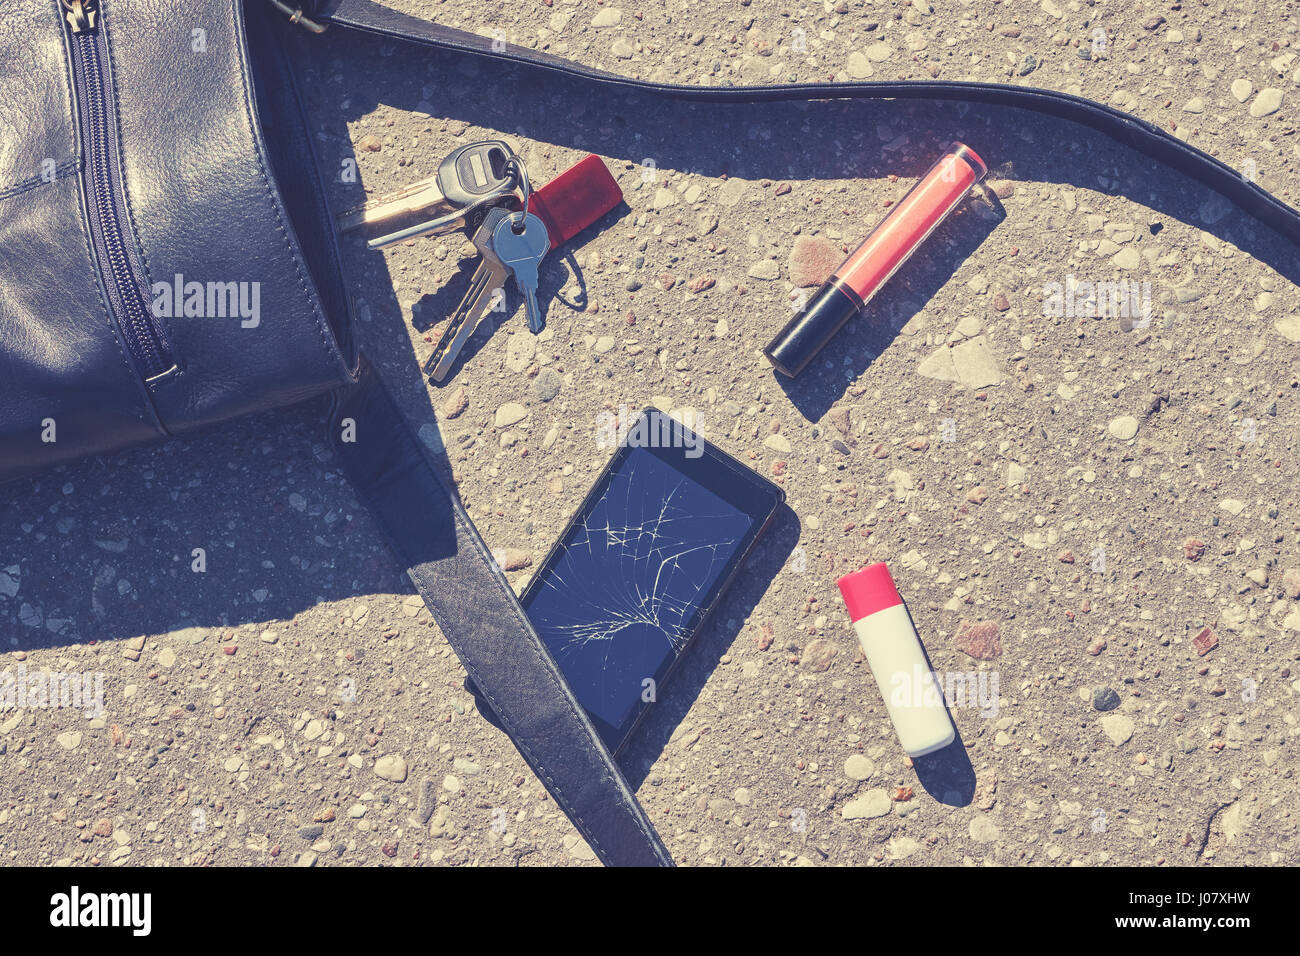 Close up of a handbag, cellular phone with broken screen, keys and lipstick on asphalt street, conceptual picture, color toning applied. Stock Photo